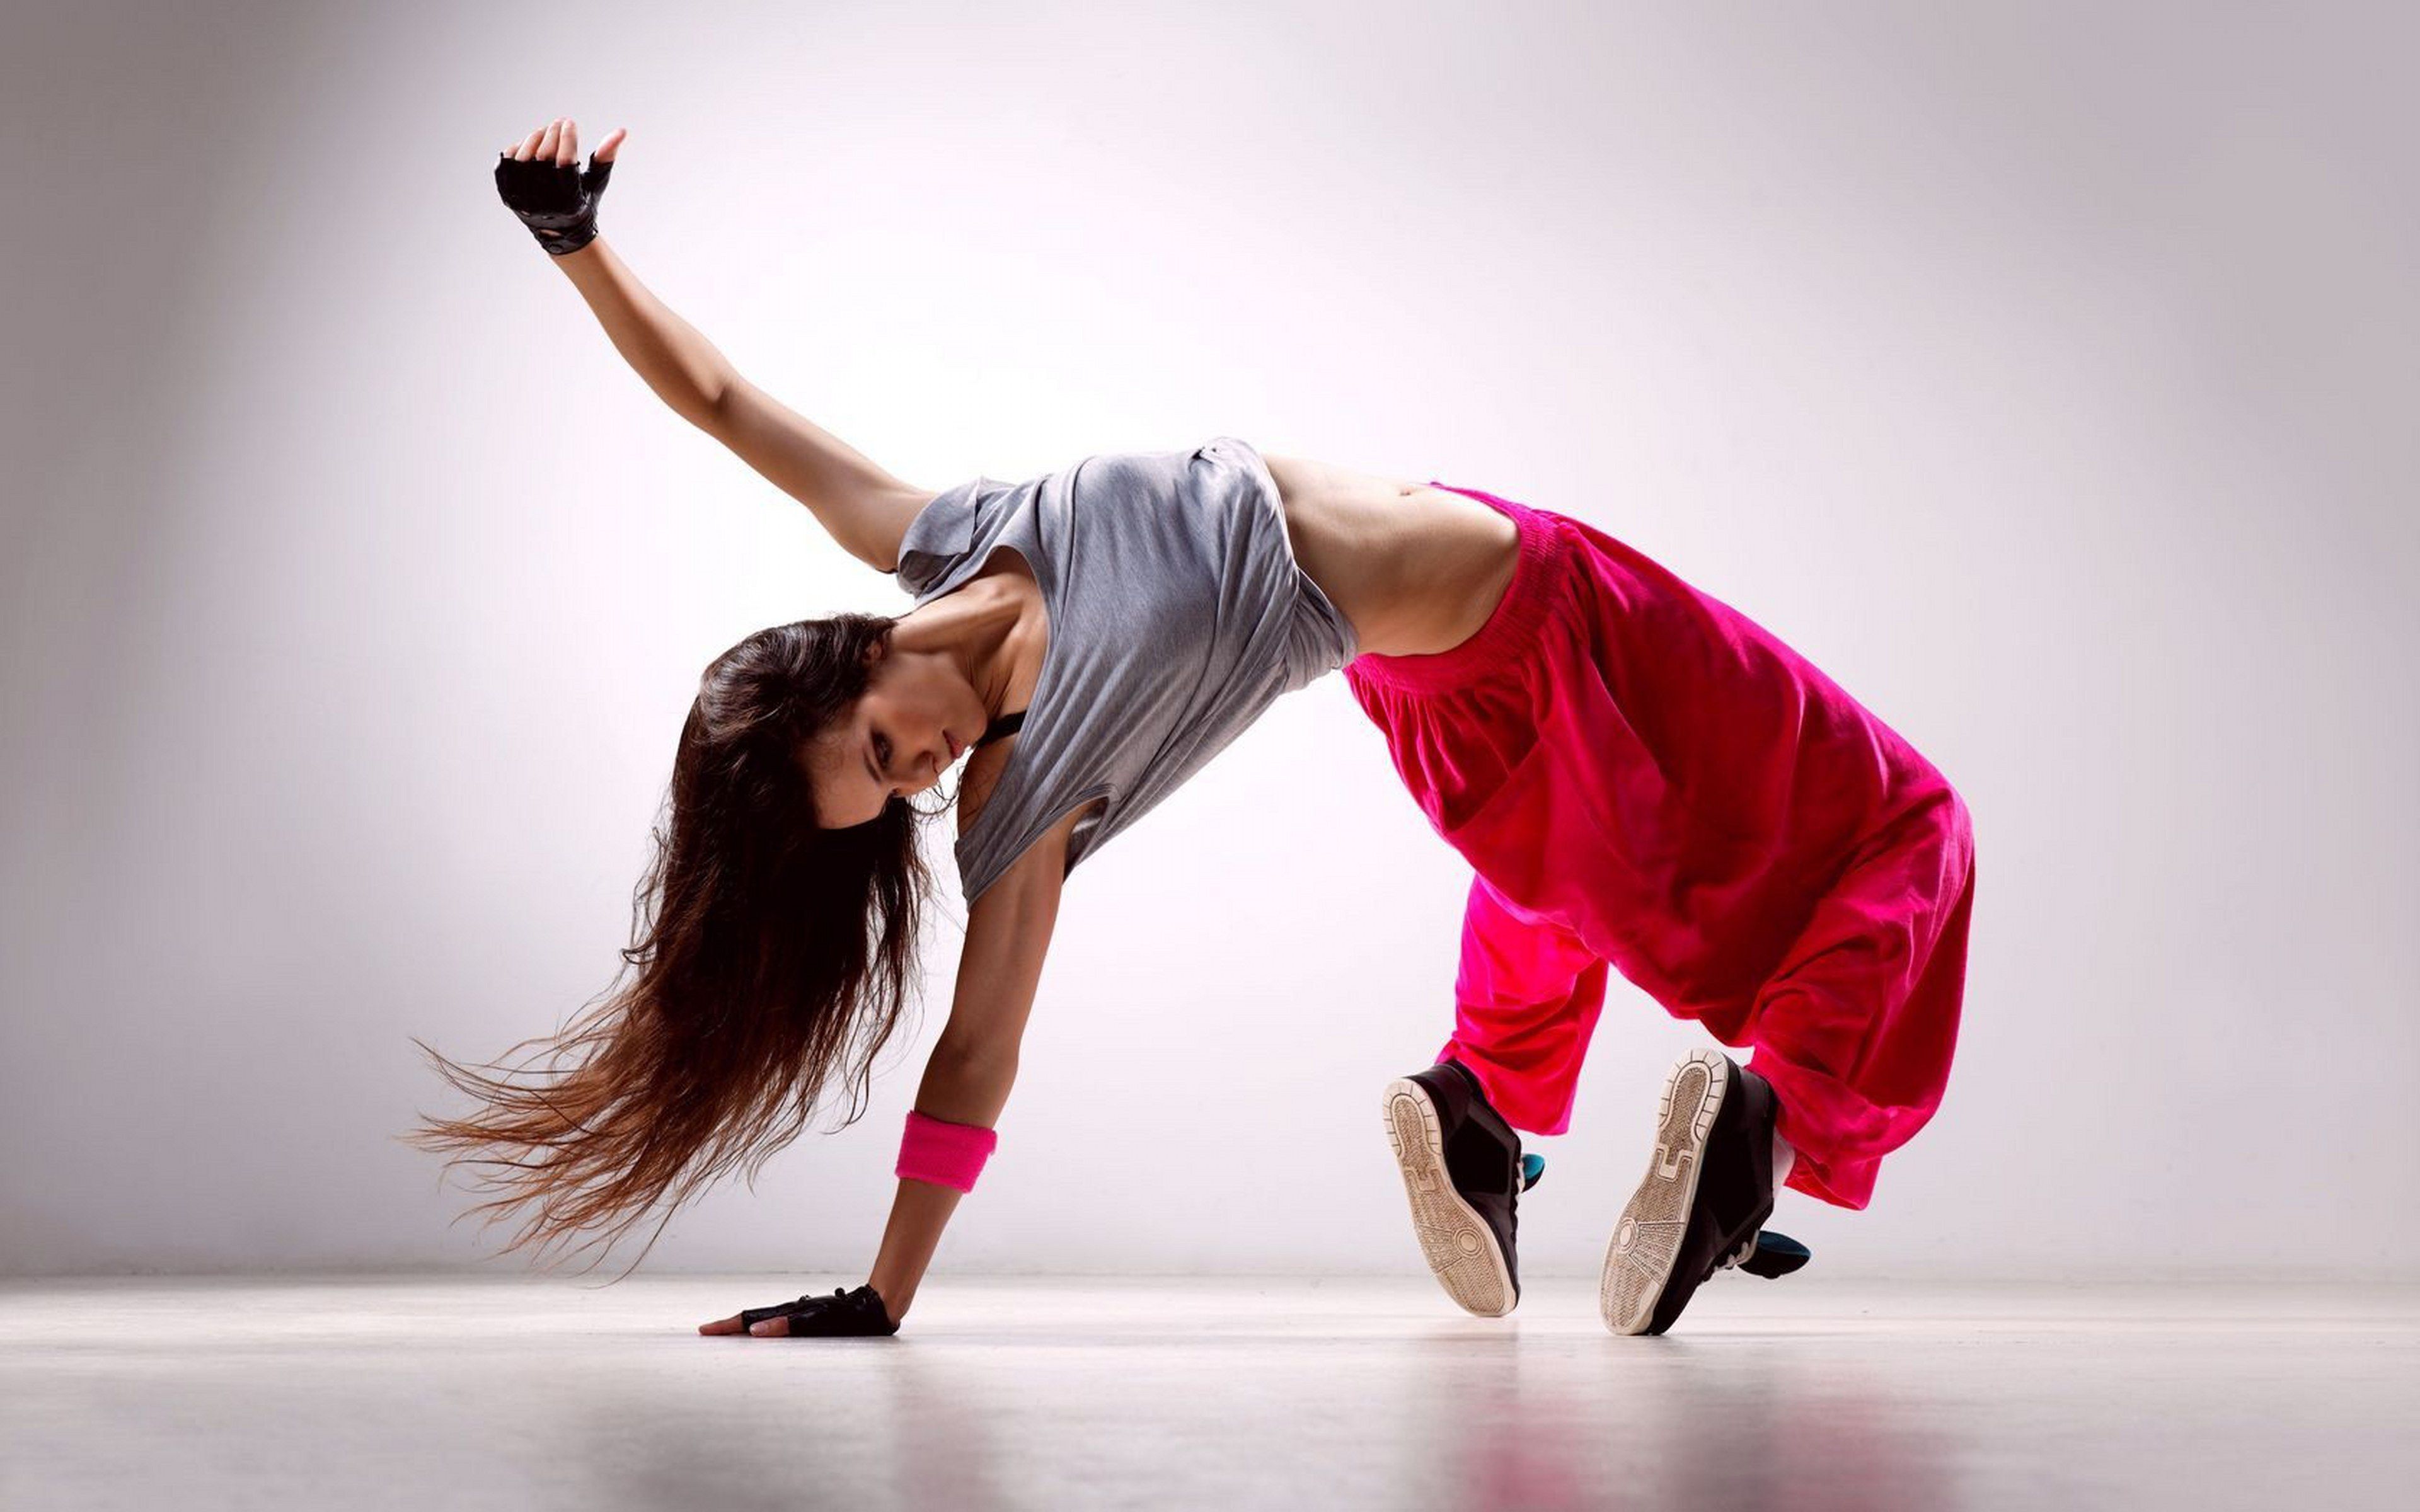 Dance Pictures, Images, HD Wallpapers and Stock Photos